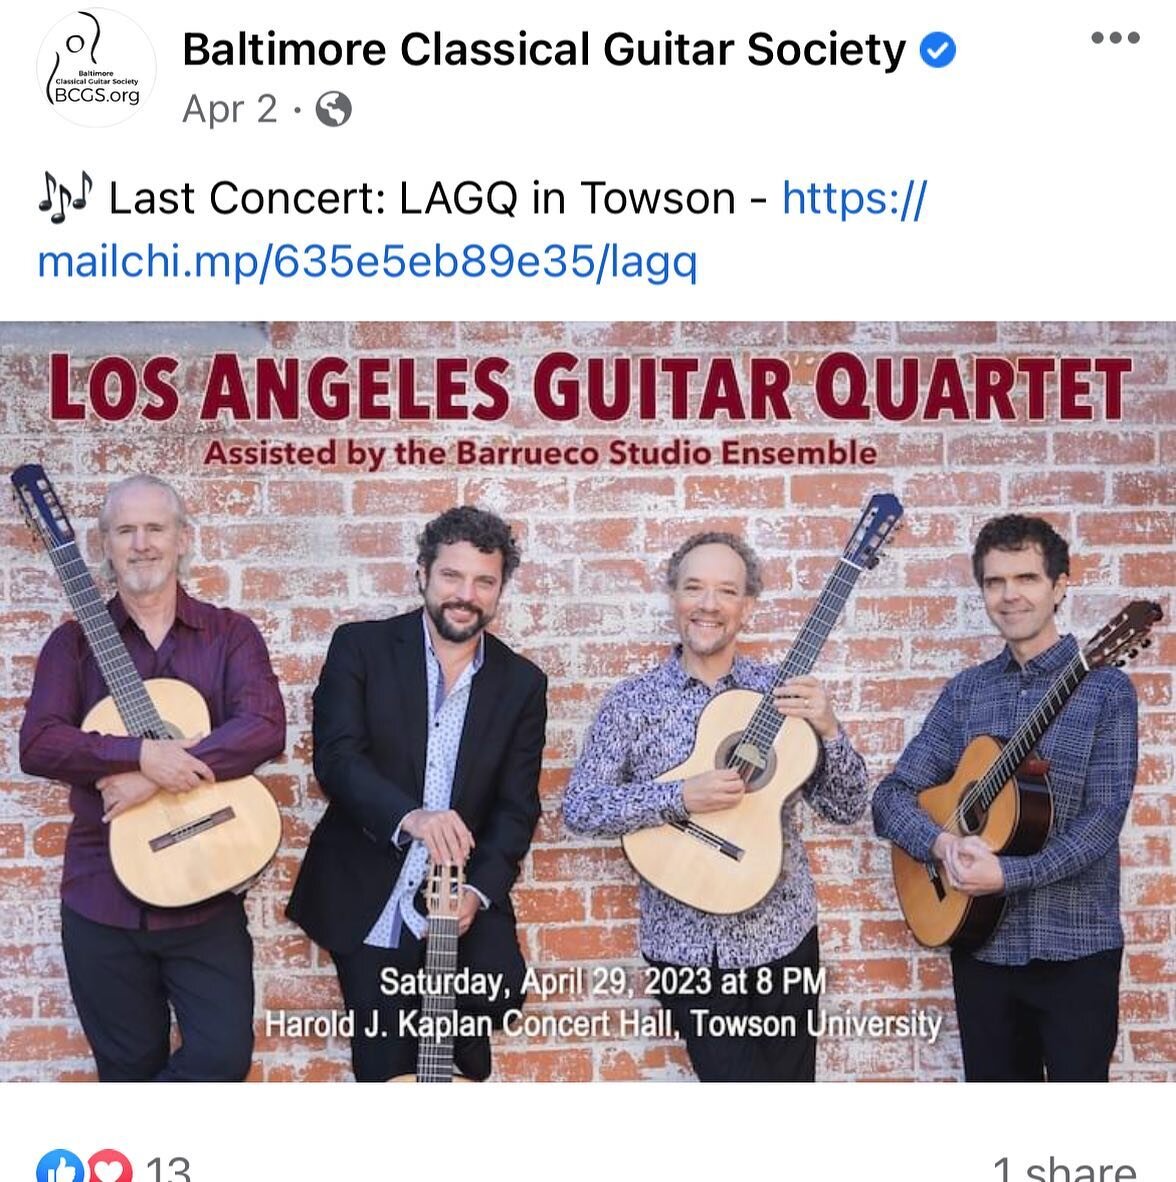 So looking forward to this concert Saturday in the Baltimore/DC area! https://mailchi.mp/635e5eb89e35/lagq